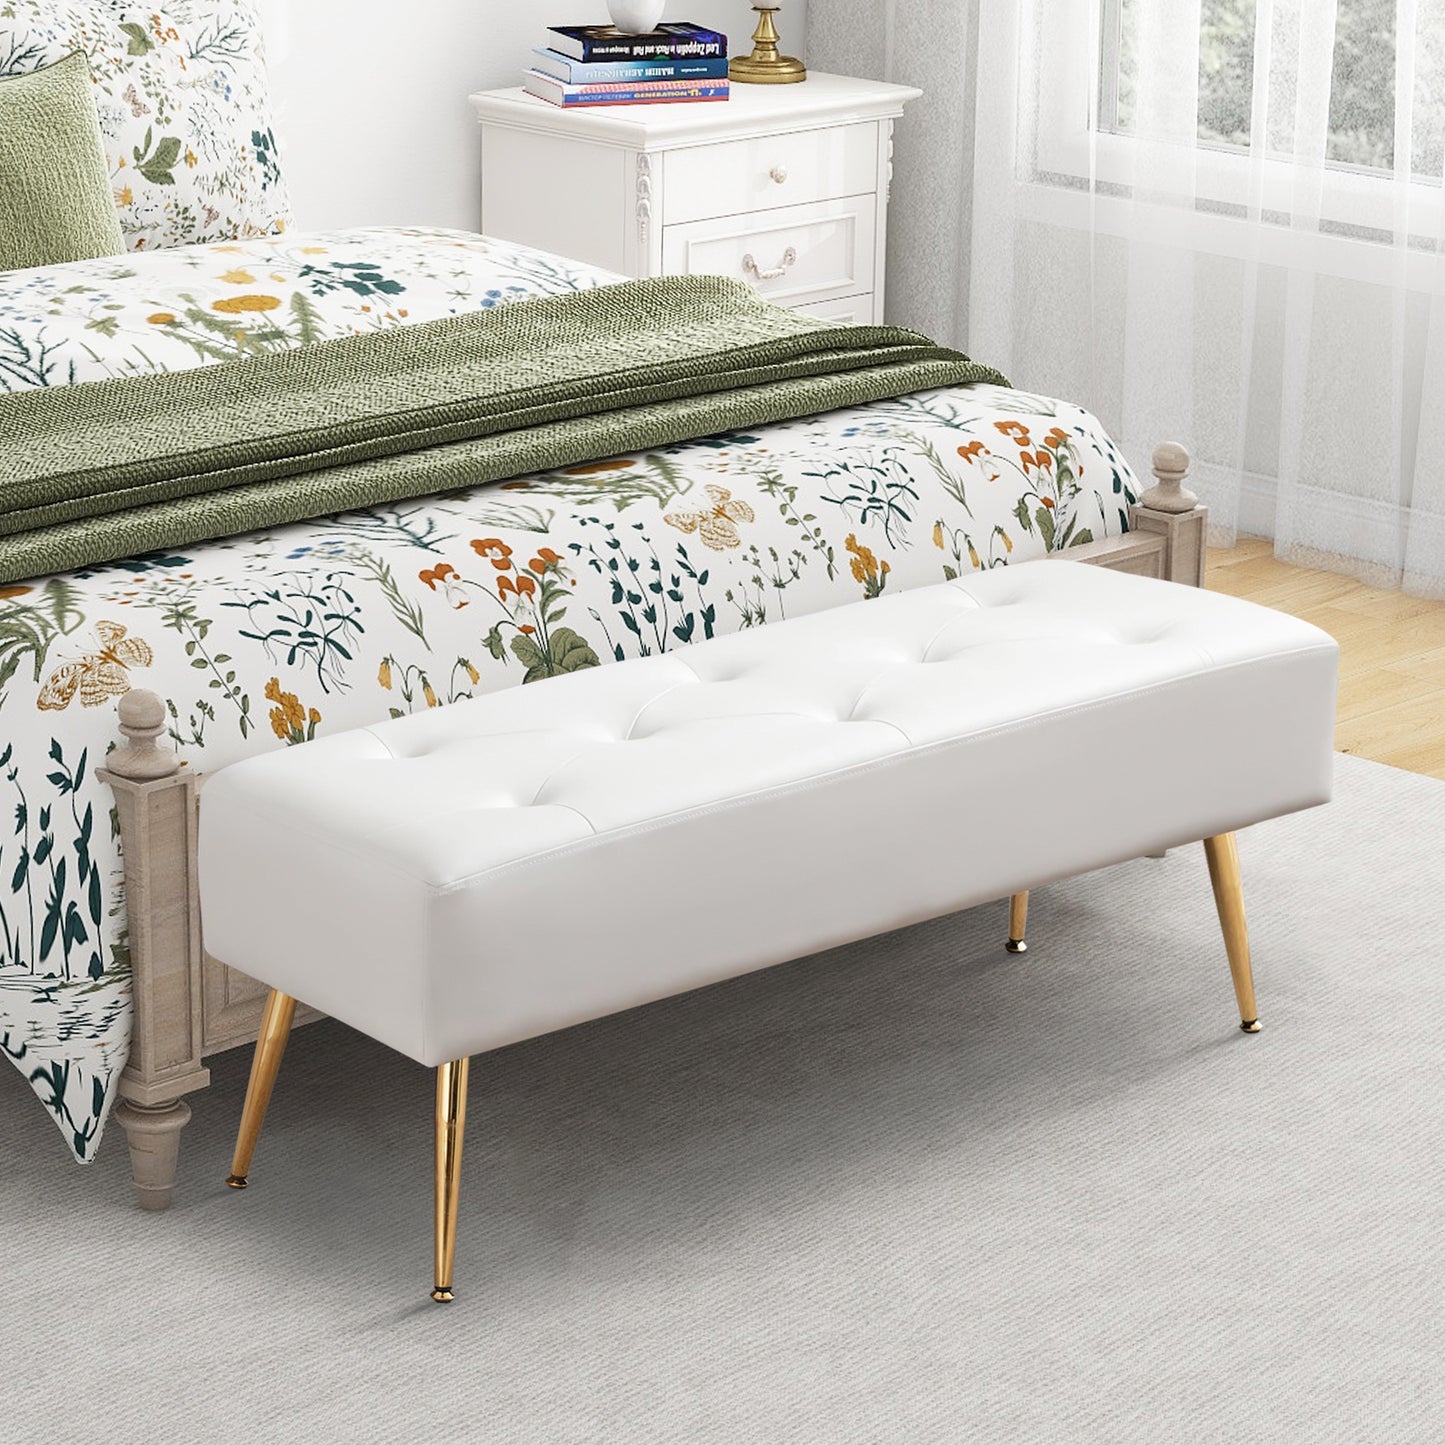 SYNGAR Upholstered Bench, Modern Leather Entryway Bench Seat Footstool, Rectangular End of Bed Bench with Wood Legs, Ottoman Bench Seat for Bedroom Living Room Hallway, White